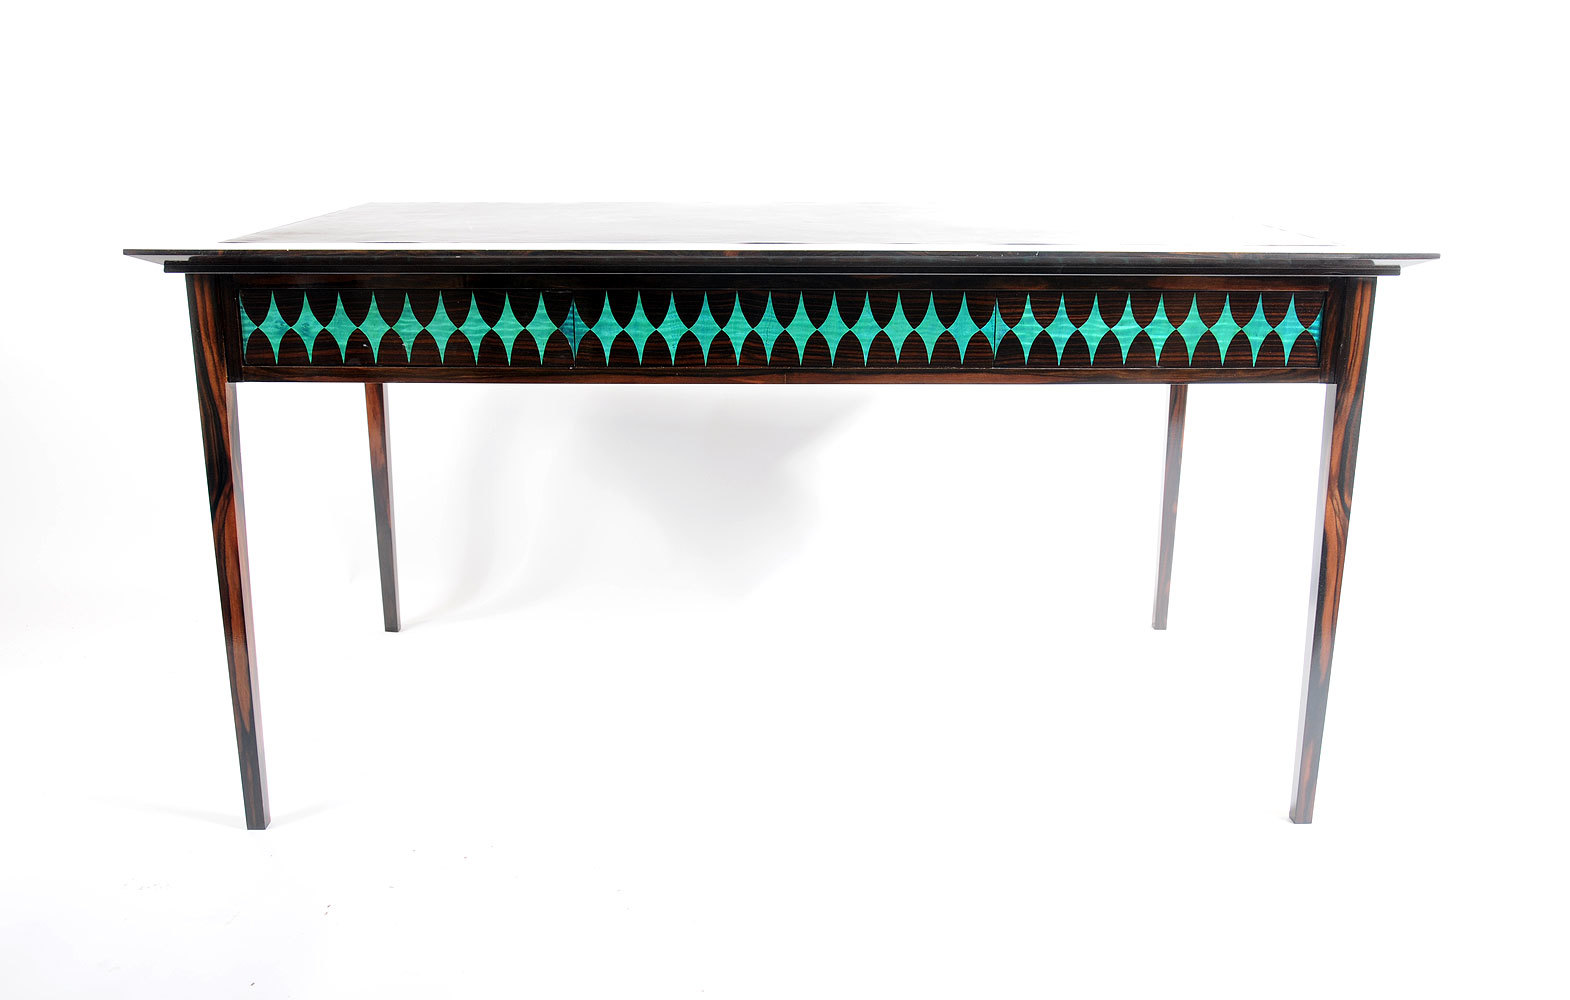 Macassar Ebony and Turquoise Table